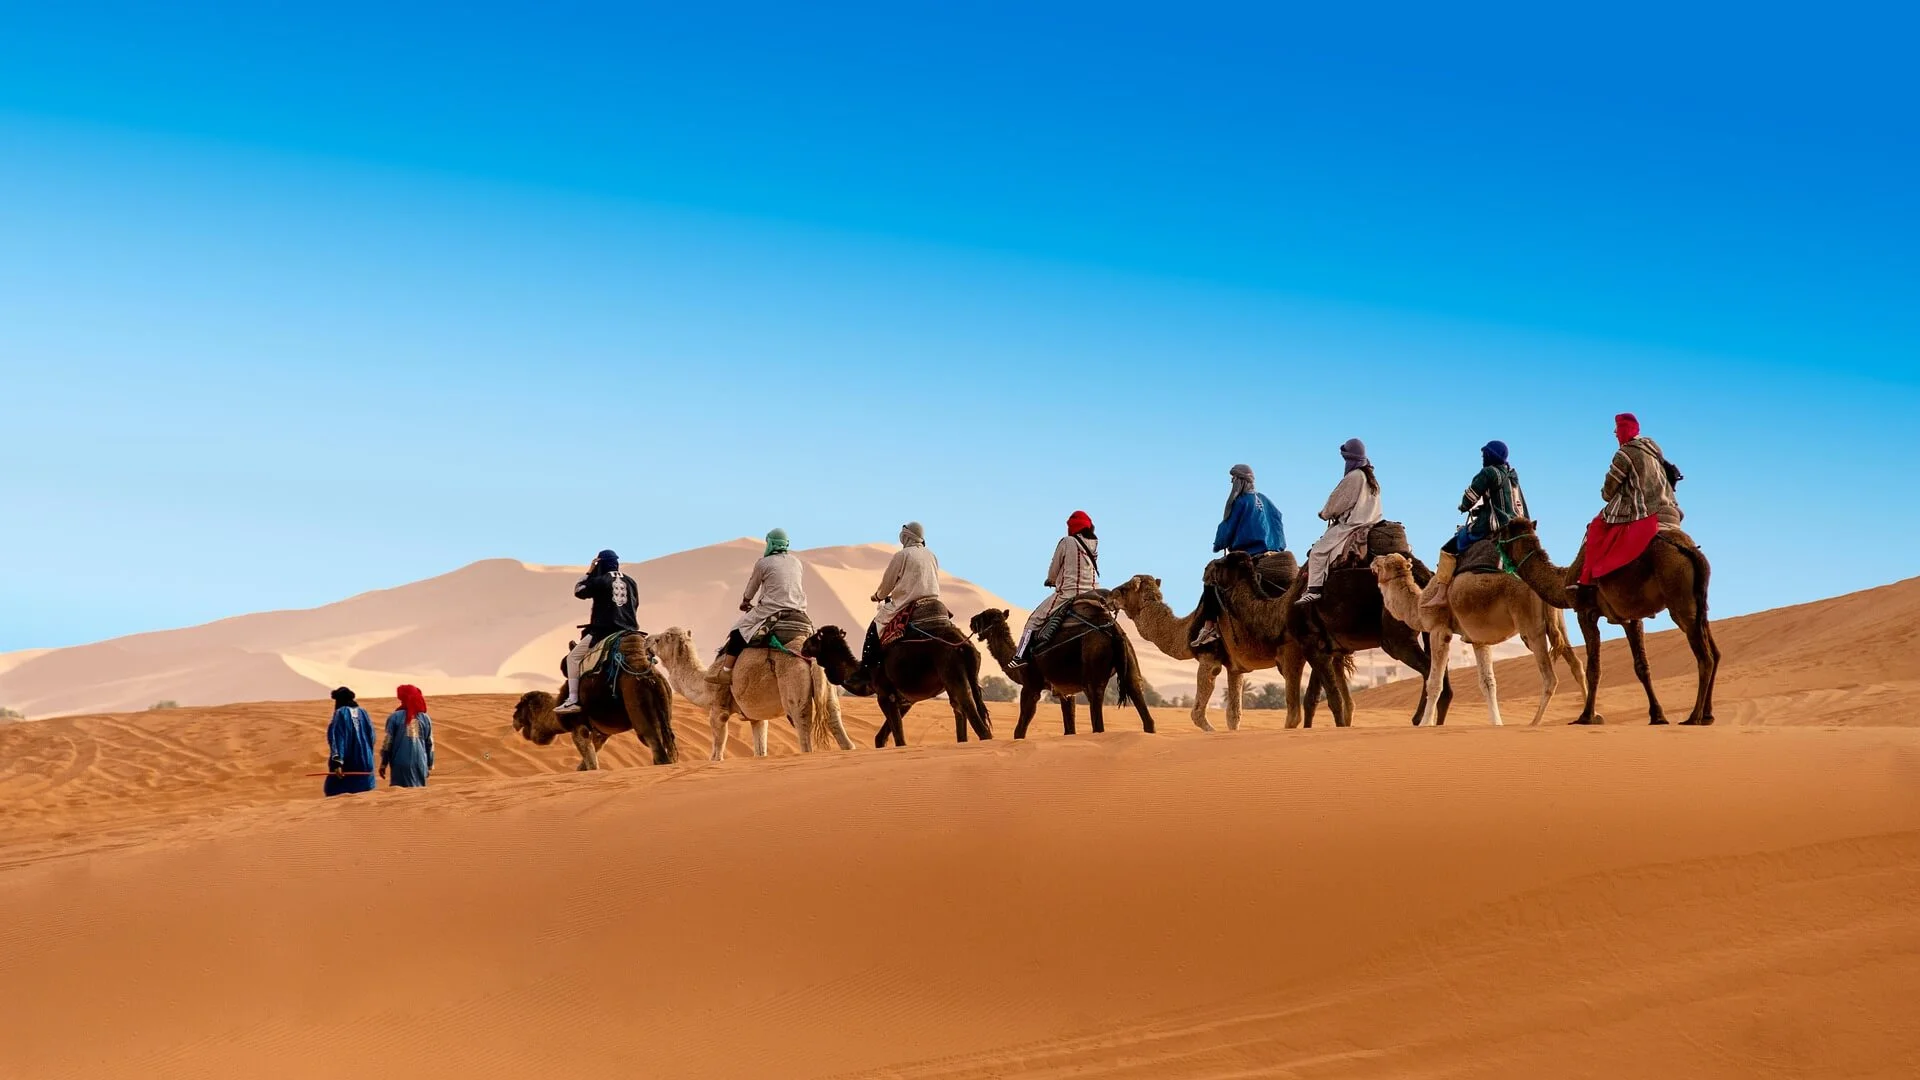 Newspapers: The number of tourists visiting Morocco has risen to 12 million